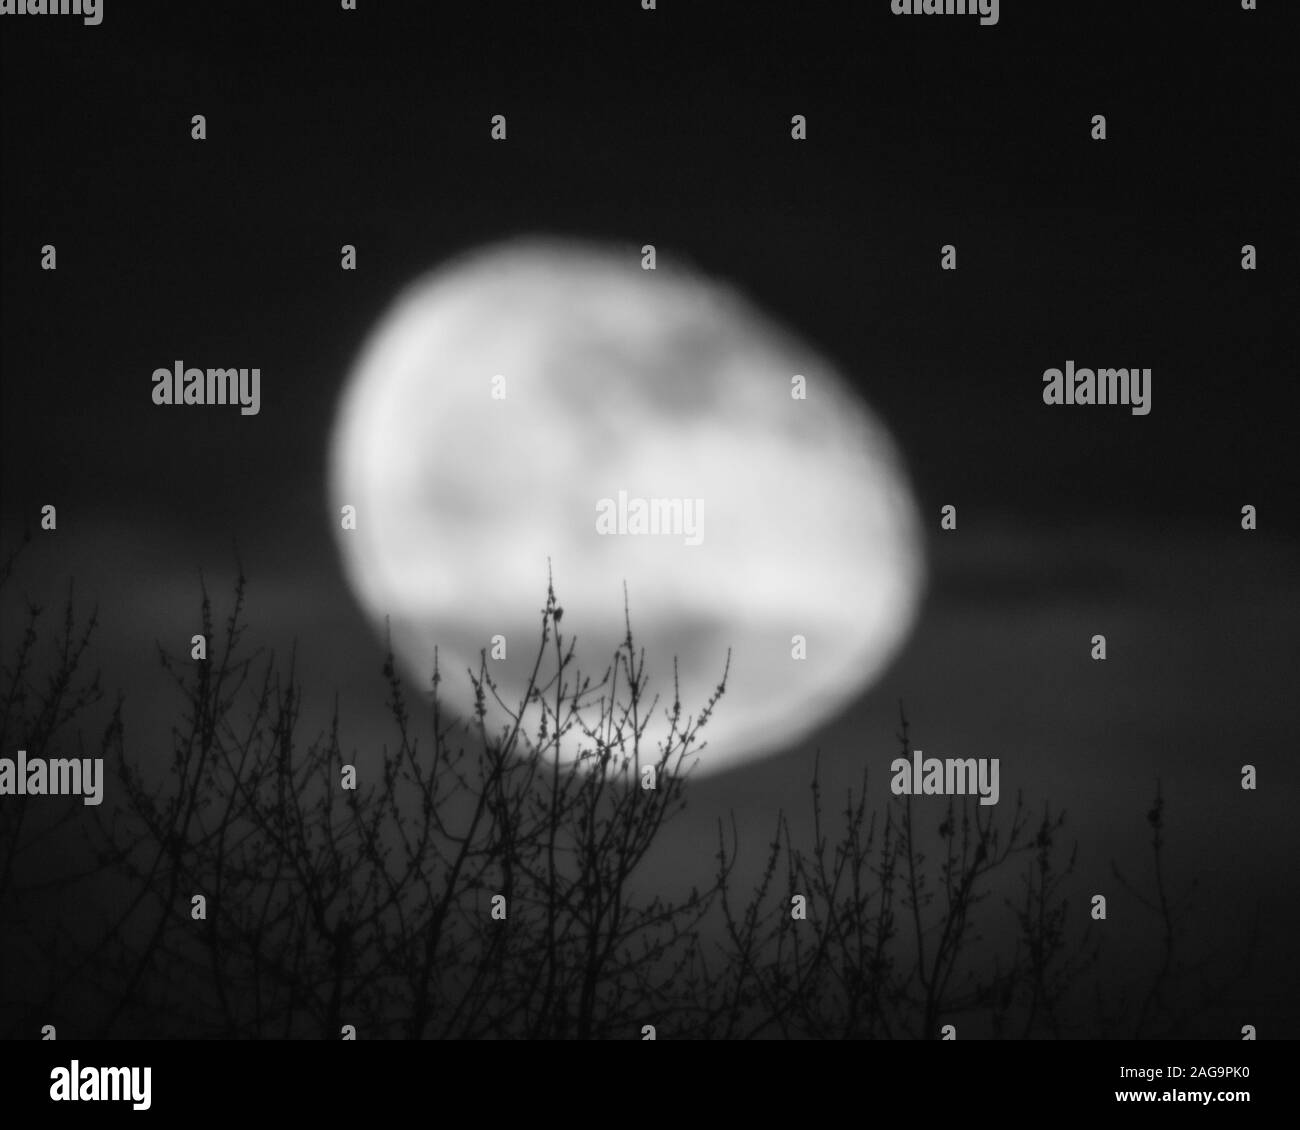 Grayscale shot of the blurring moon taken behind tree branches Stock Photo